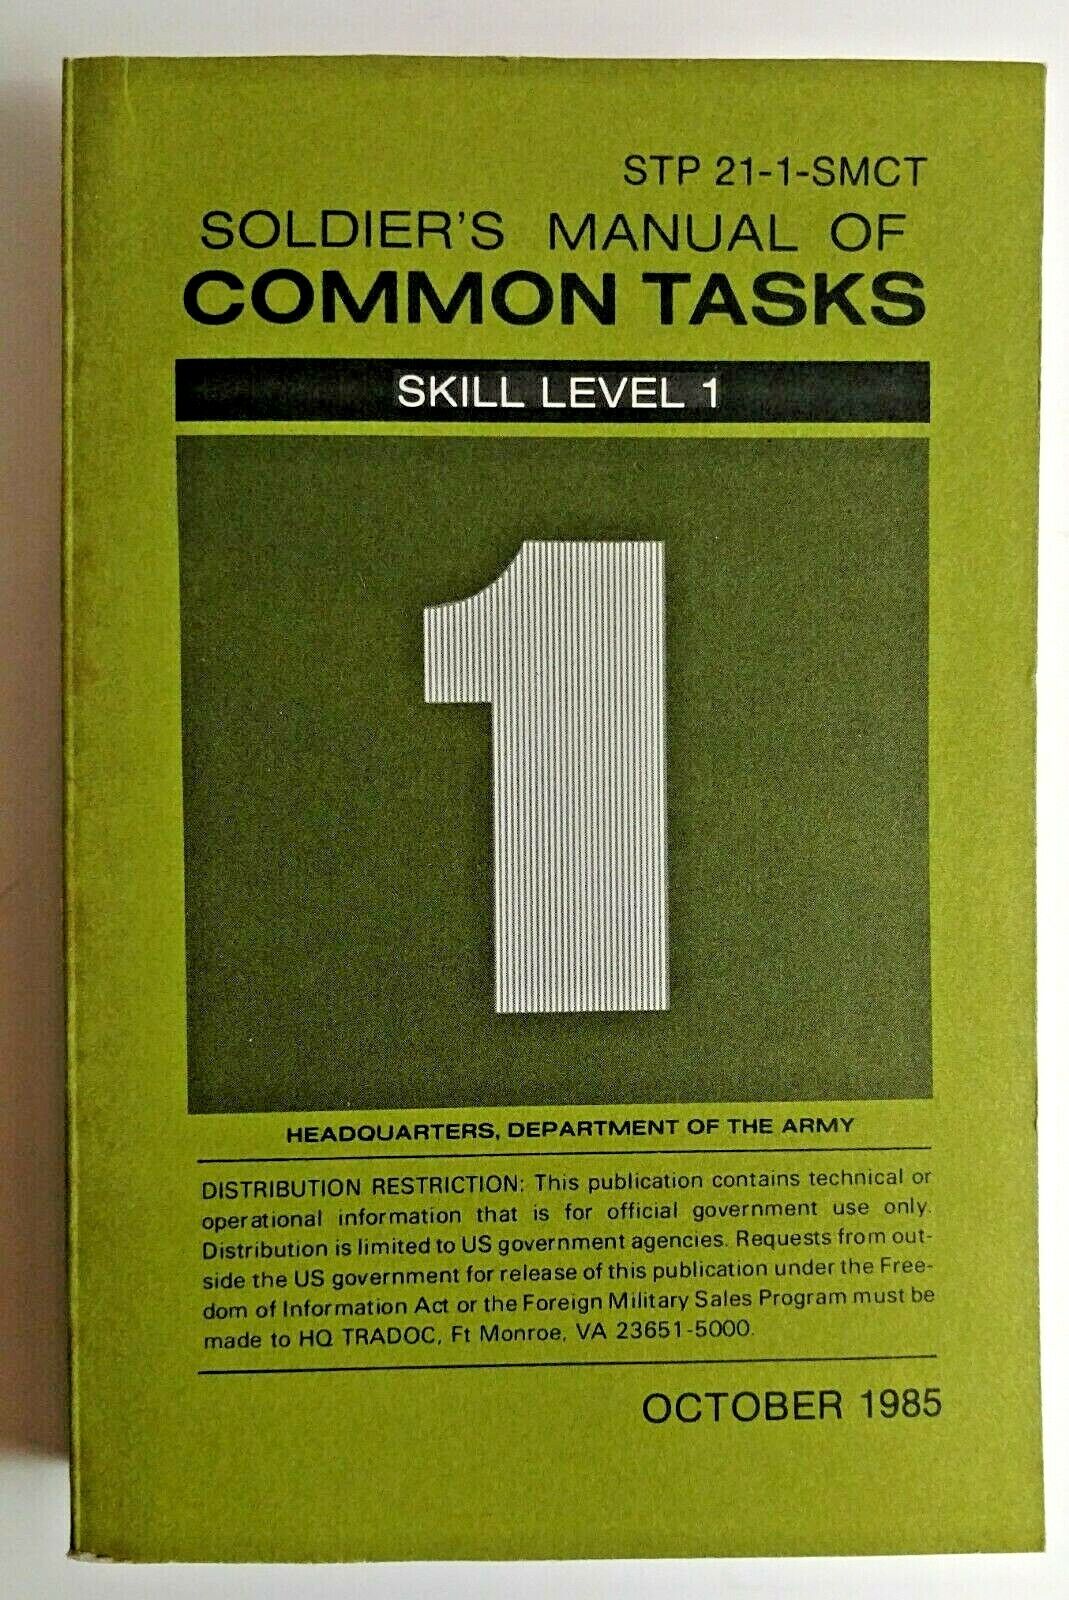 1985 Soldier's Manual of Common Tasks STP 21-1-SMCT, Skill Level 1, Used 